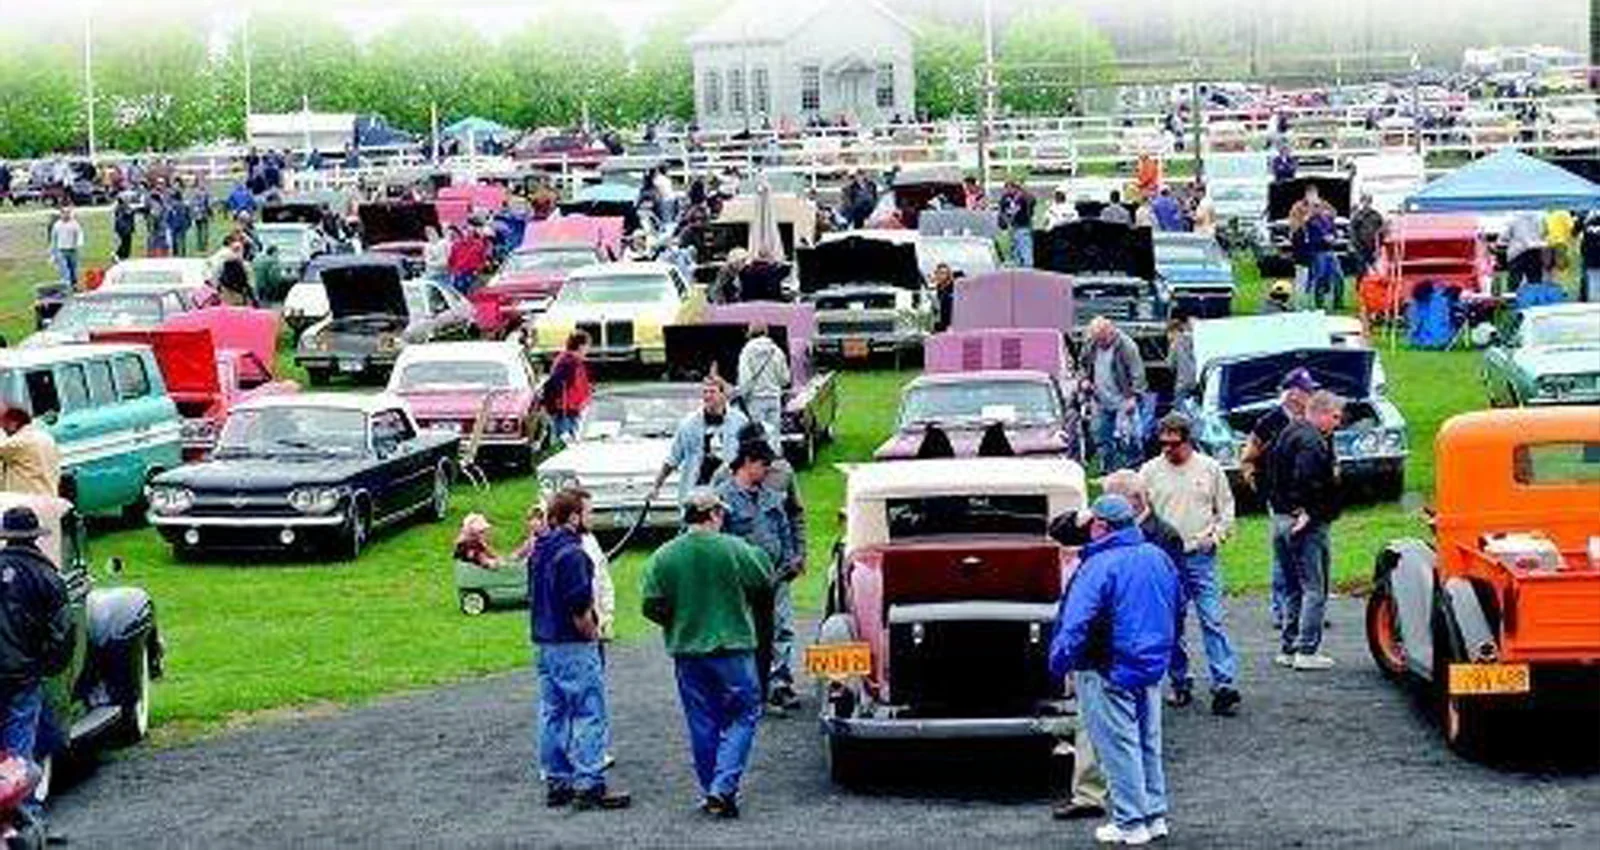 Rhinebeck Antique Car Show | Pore over countless hot rods, custom cars, and 60 antiques and classics. | Photo Courtesy of Dutchess County Fairgrounds